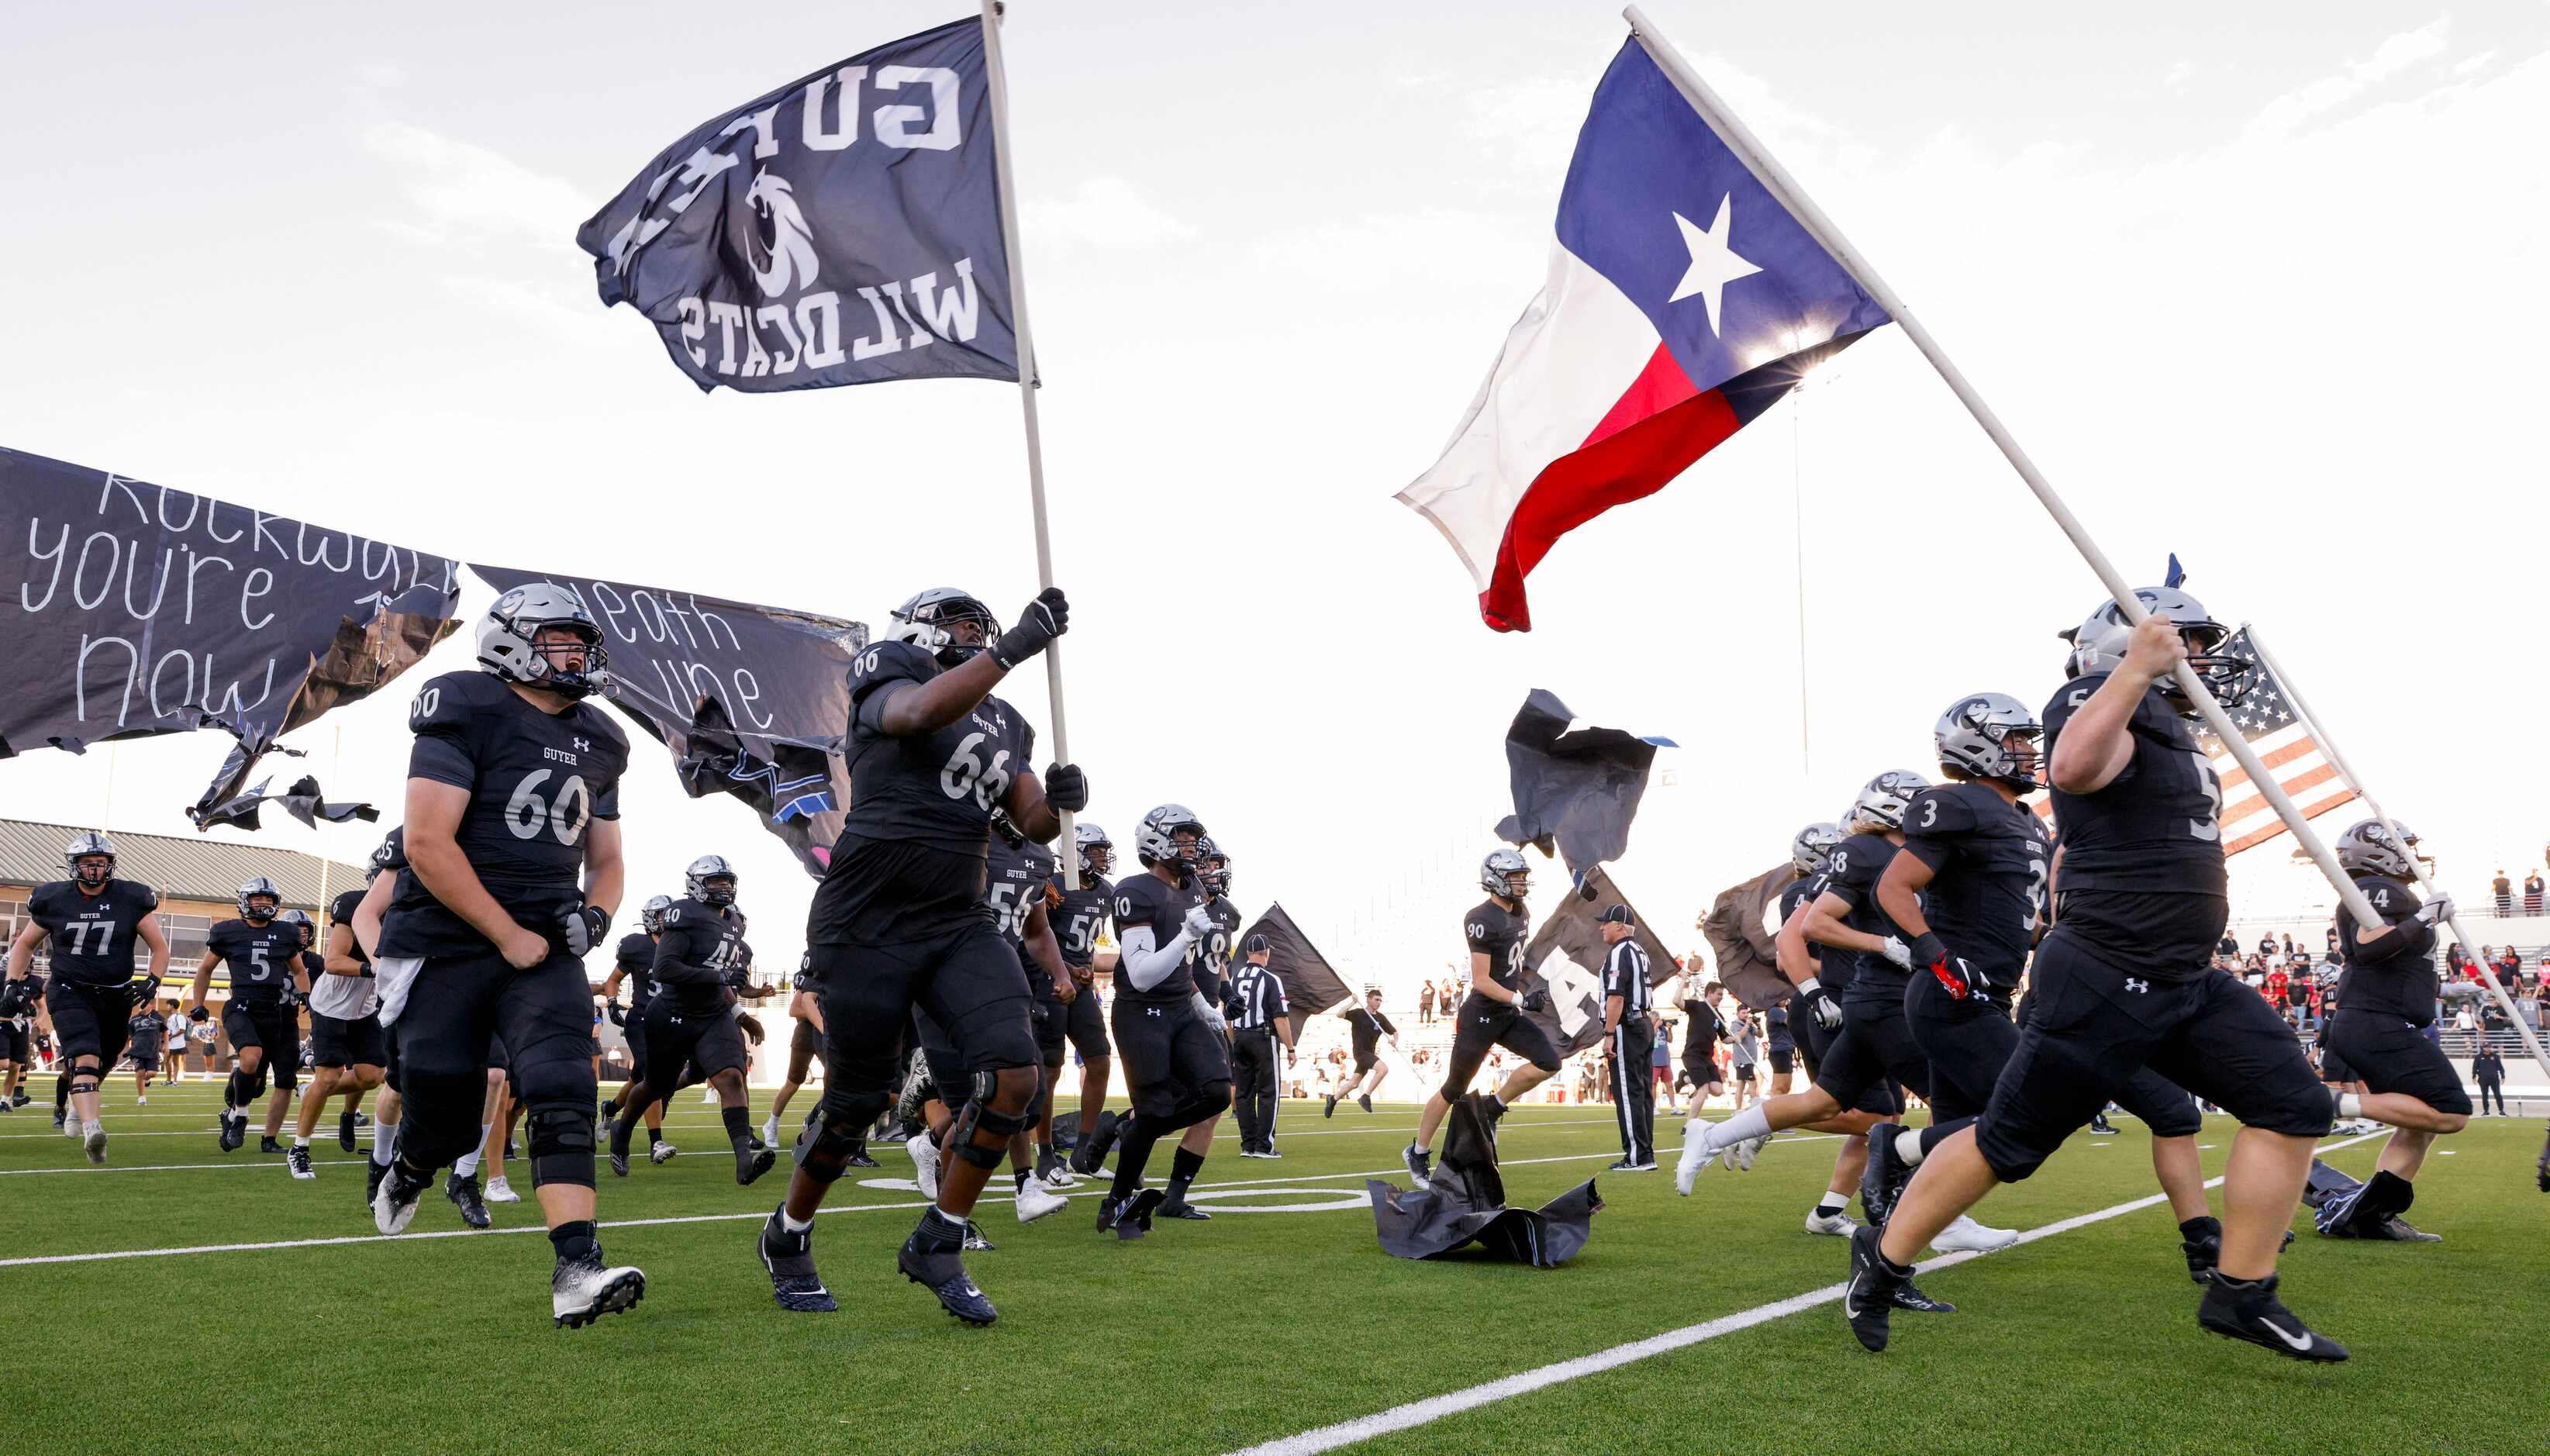 Denton Guyer takes the field before the first game of the season against Rockwall-Heath at...